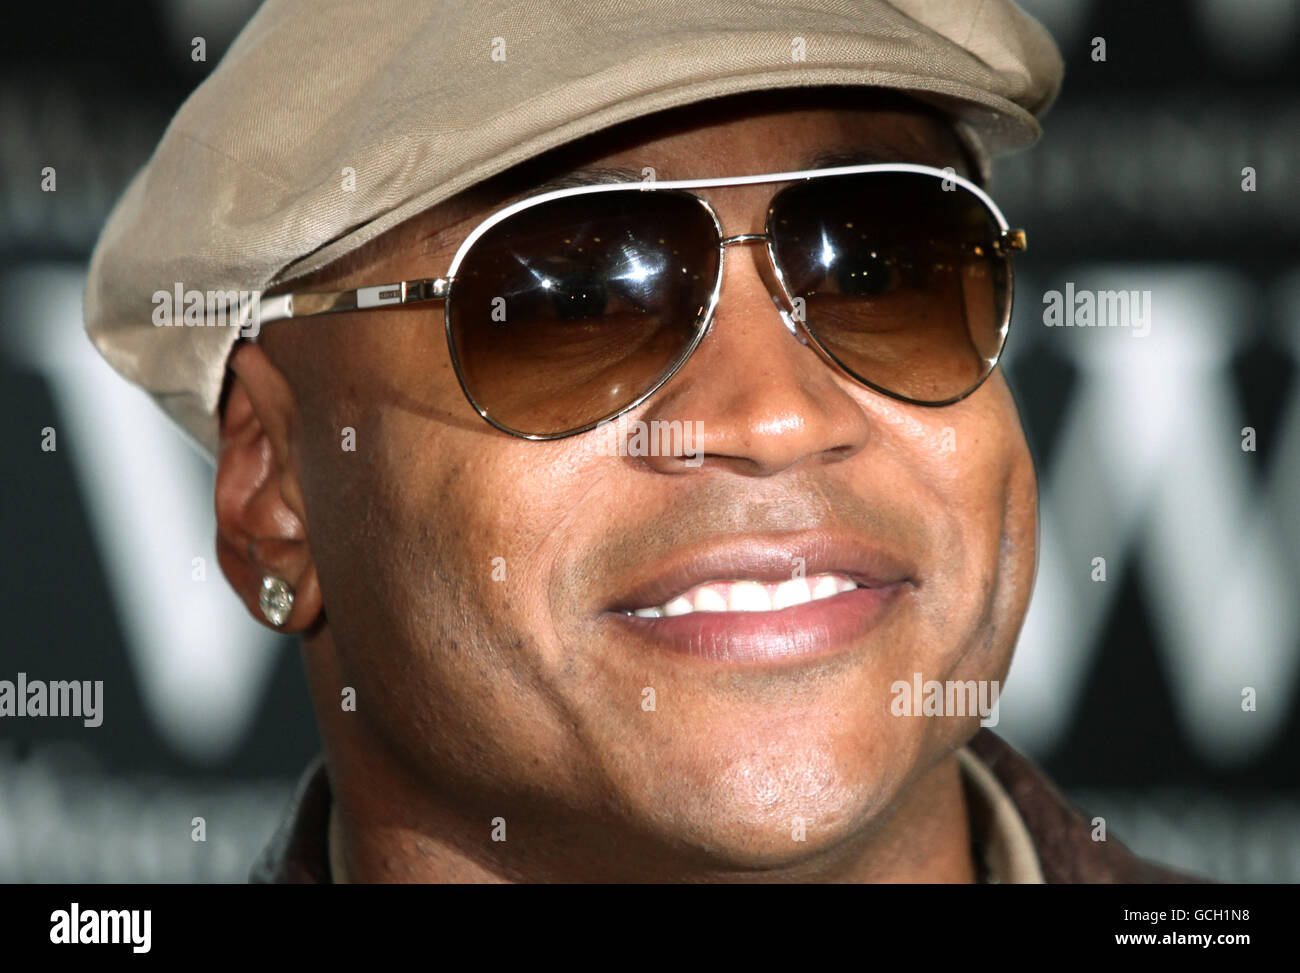 LL Cool J during a signing for his book 'LL Cool J's Platinum 360 Diet and Lifestyle', at Waterstone's Piccadilly, London. PRESS ASSOCIATION Photo. Picture date: Wednesday June 2, 2010. Photo credit should read: Yui Mok/PA Wire Stock Photo